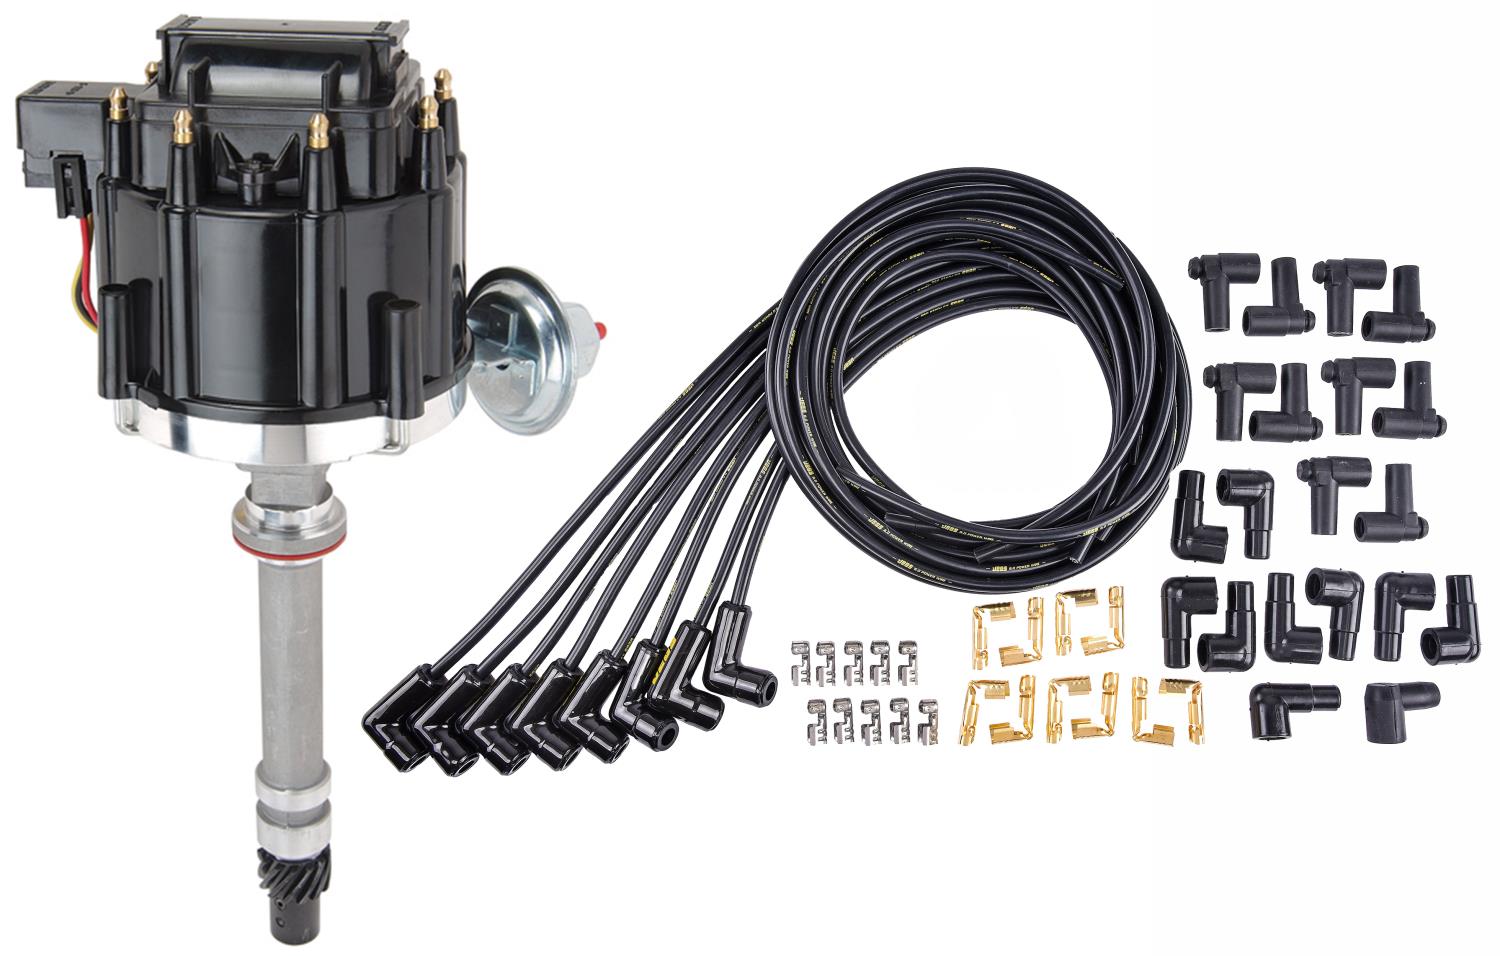 HEI Distributor Kit For Small Block & Big Block Chevy with 8 mm Black HI-Temp Wires & 90-Degree Ceramic Boots